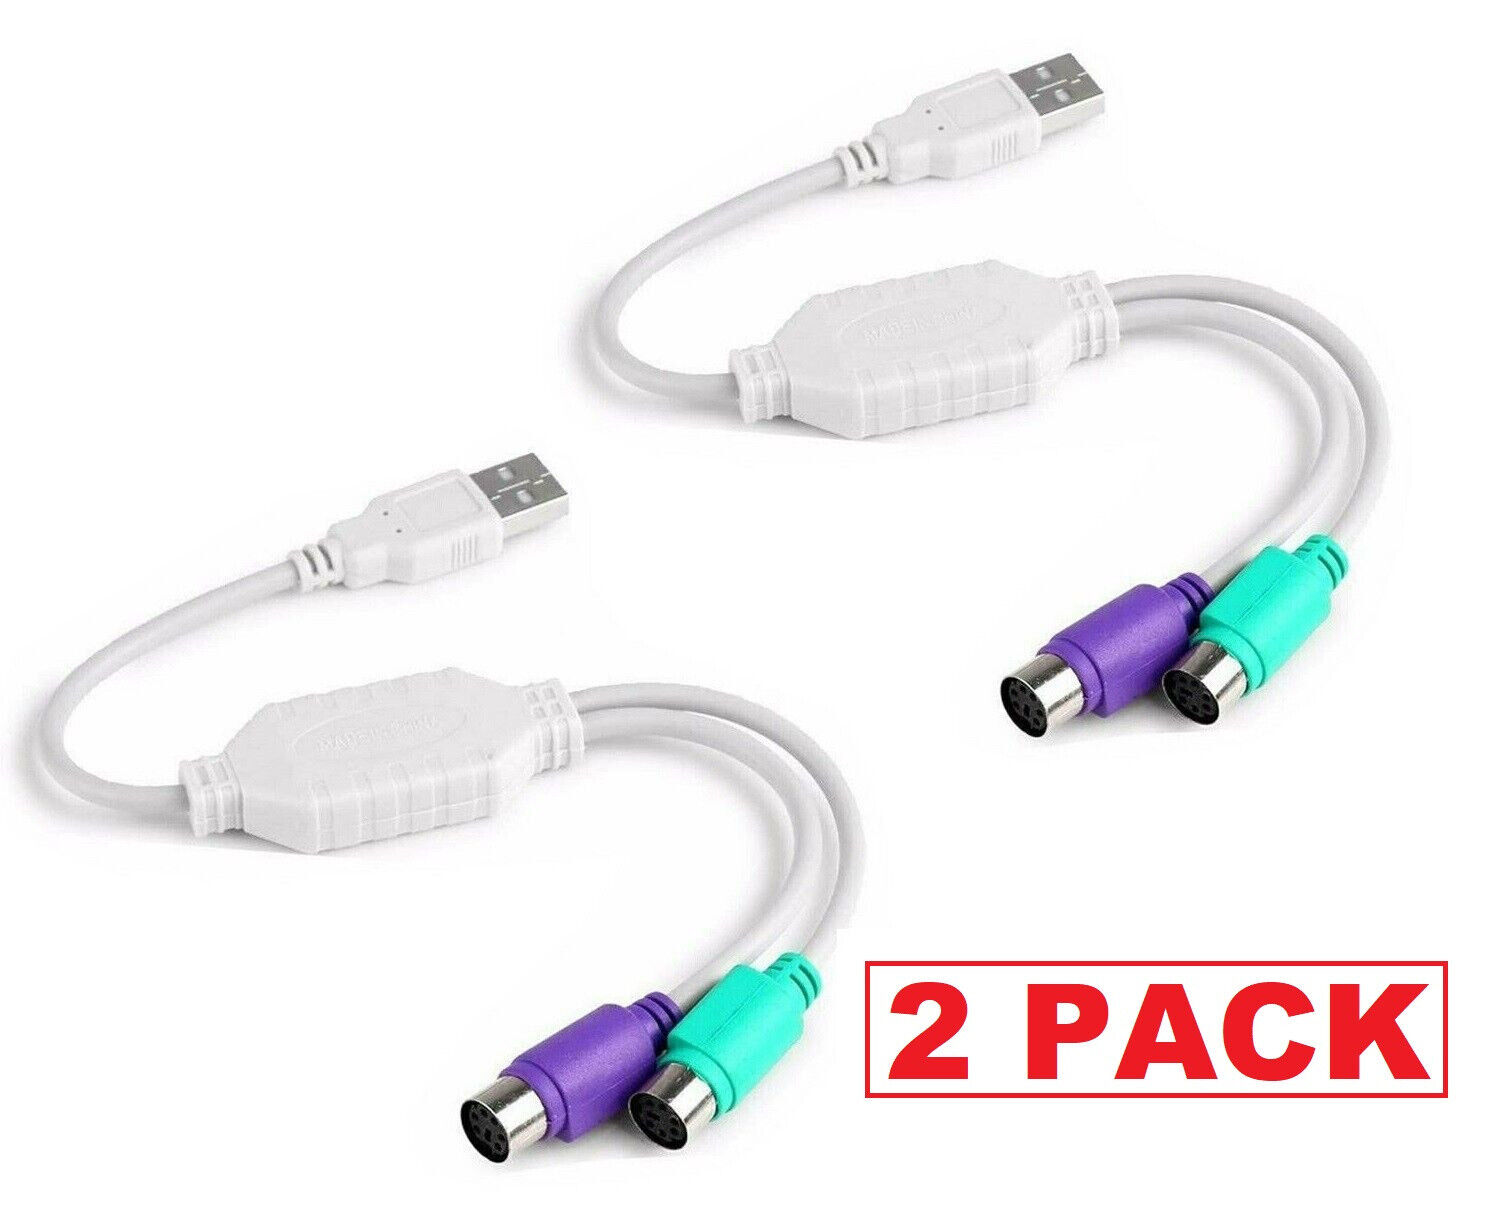 2-Pack Dual PS2 Female to USB Male Converter Adapter Cable for Mouse Keyboard